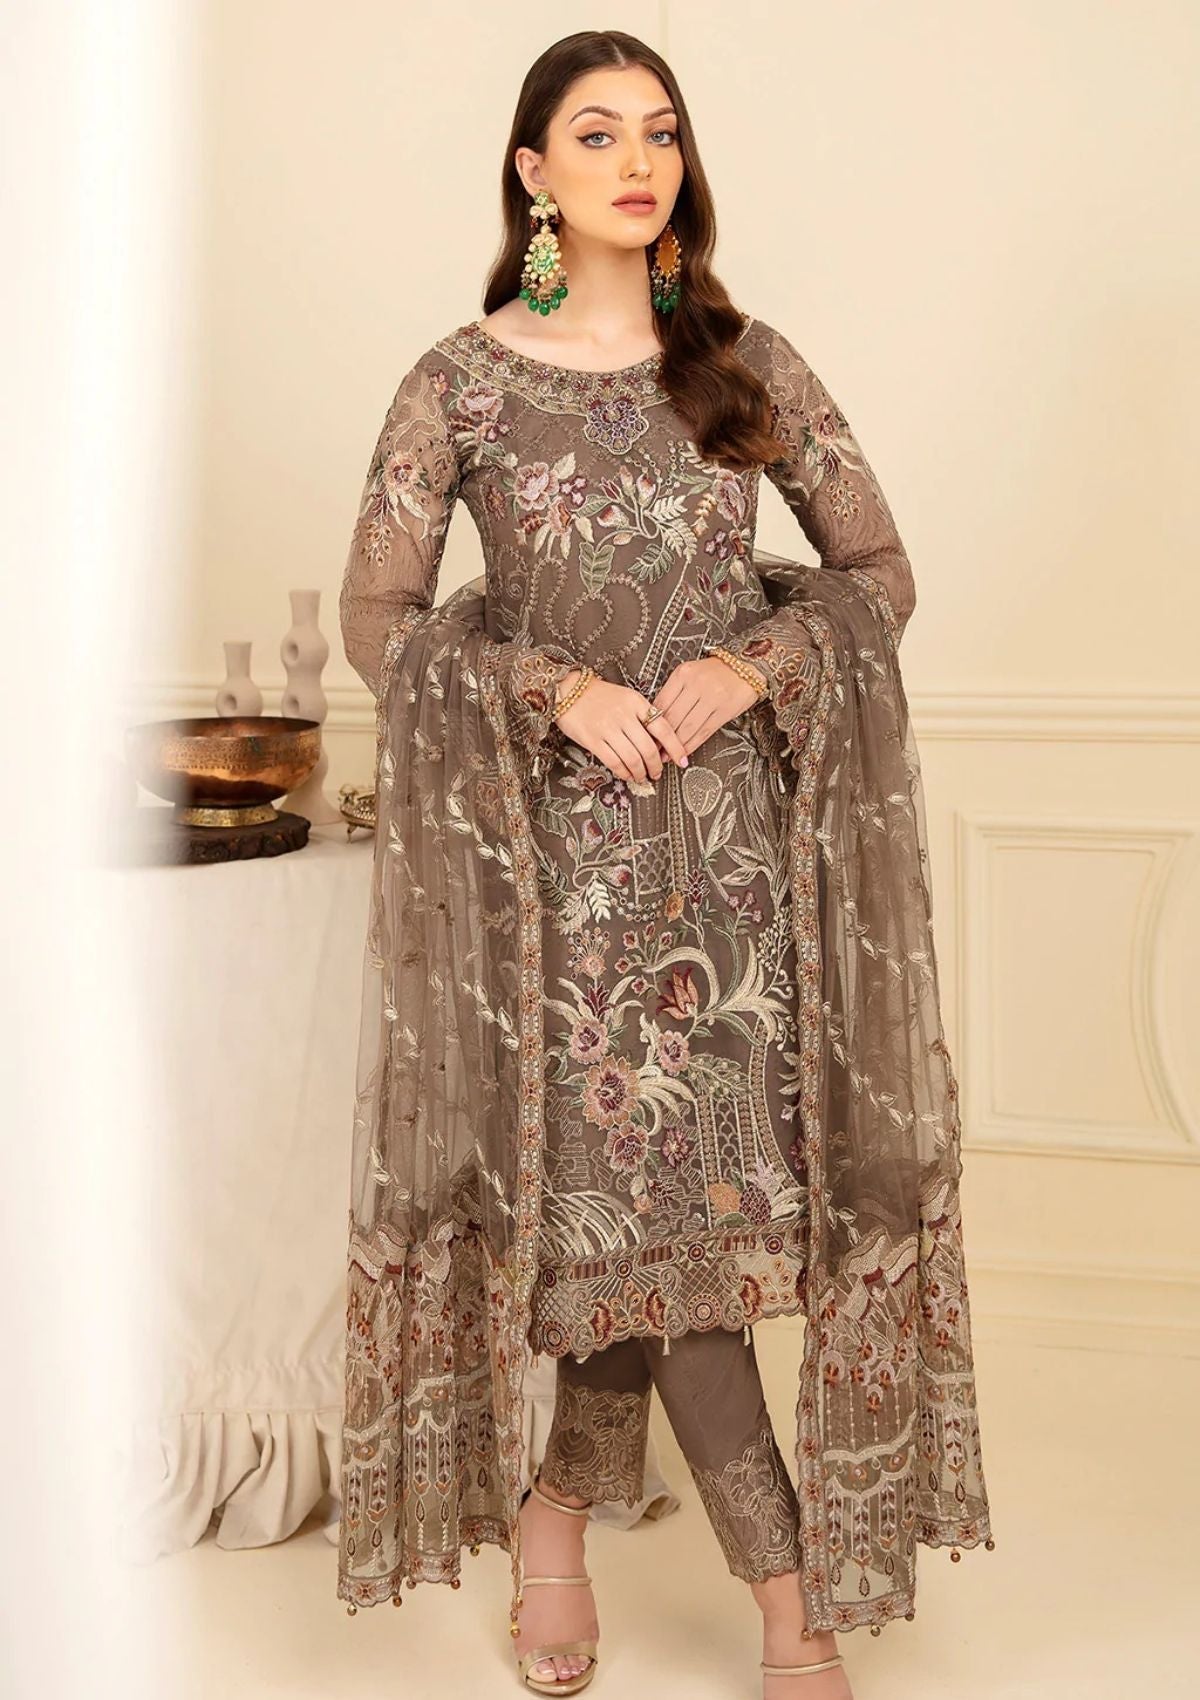 Formal Collection - Ramsha - Minhal - V07 - M#710 available at Saleem Fabrics Traditions